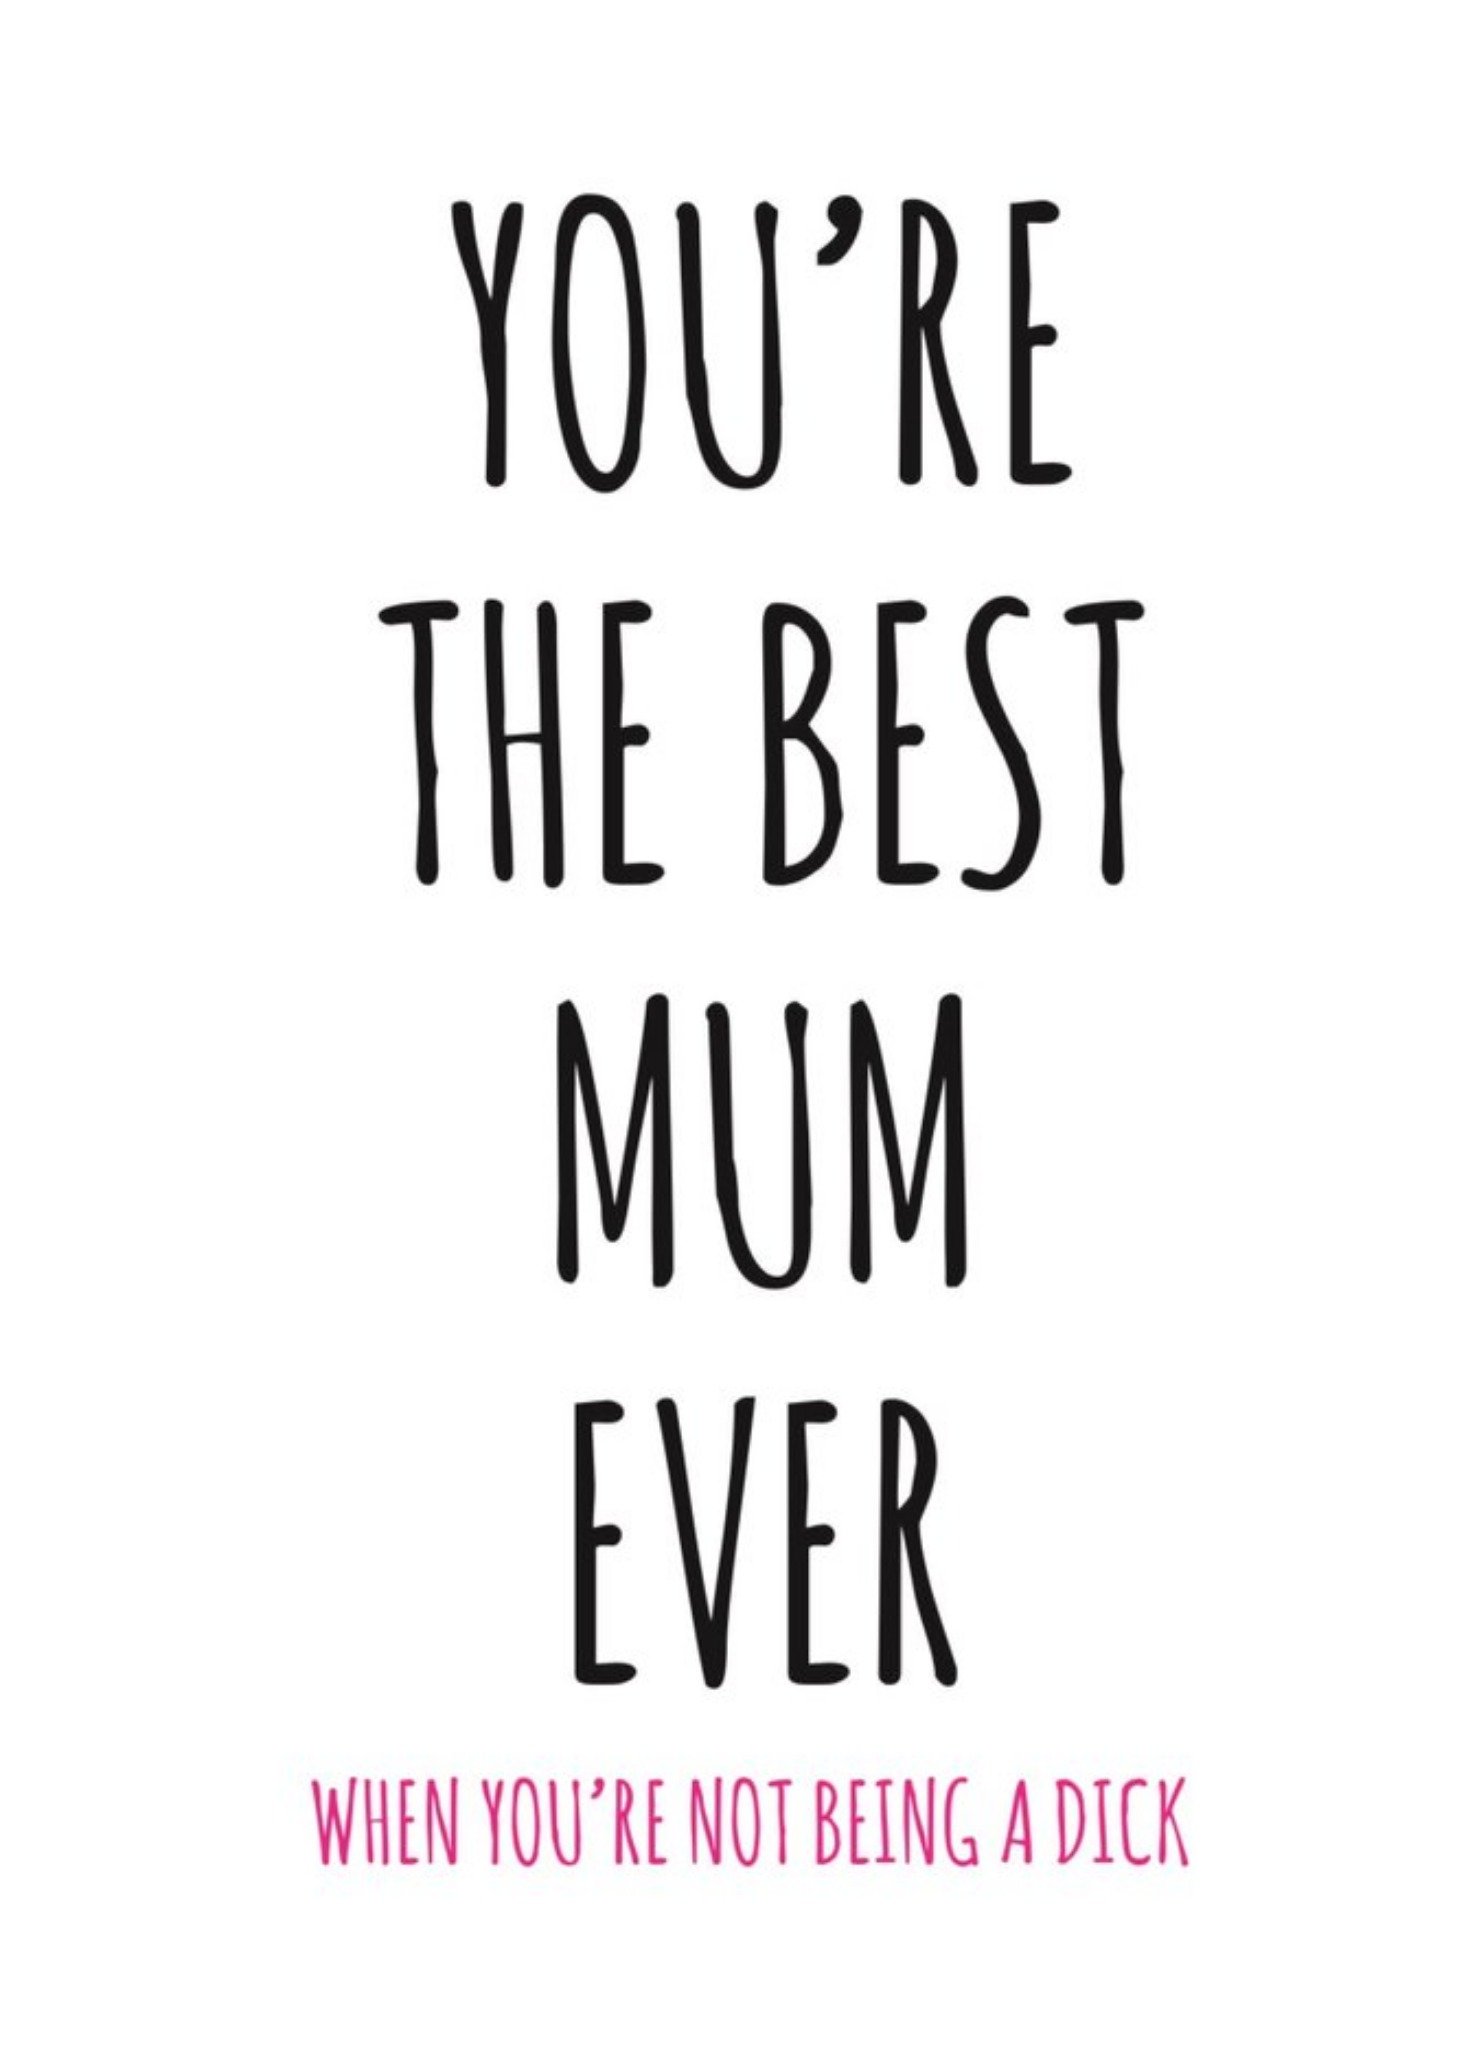 Banter King Typographical Youre The Best Mum Ever When Youre Not Being A Dick Card Ecard